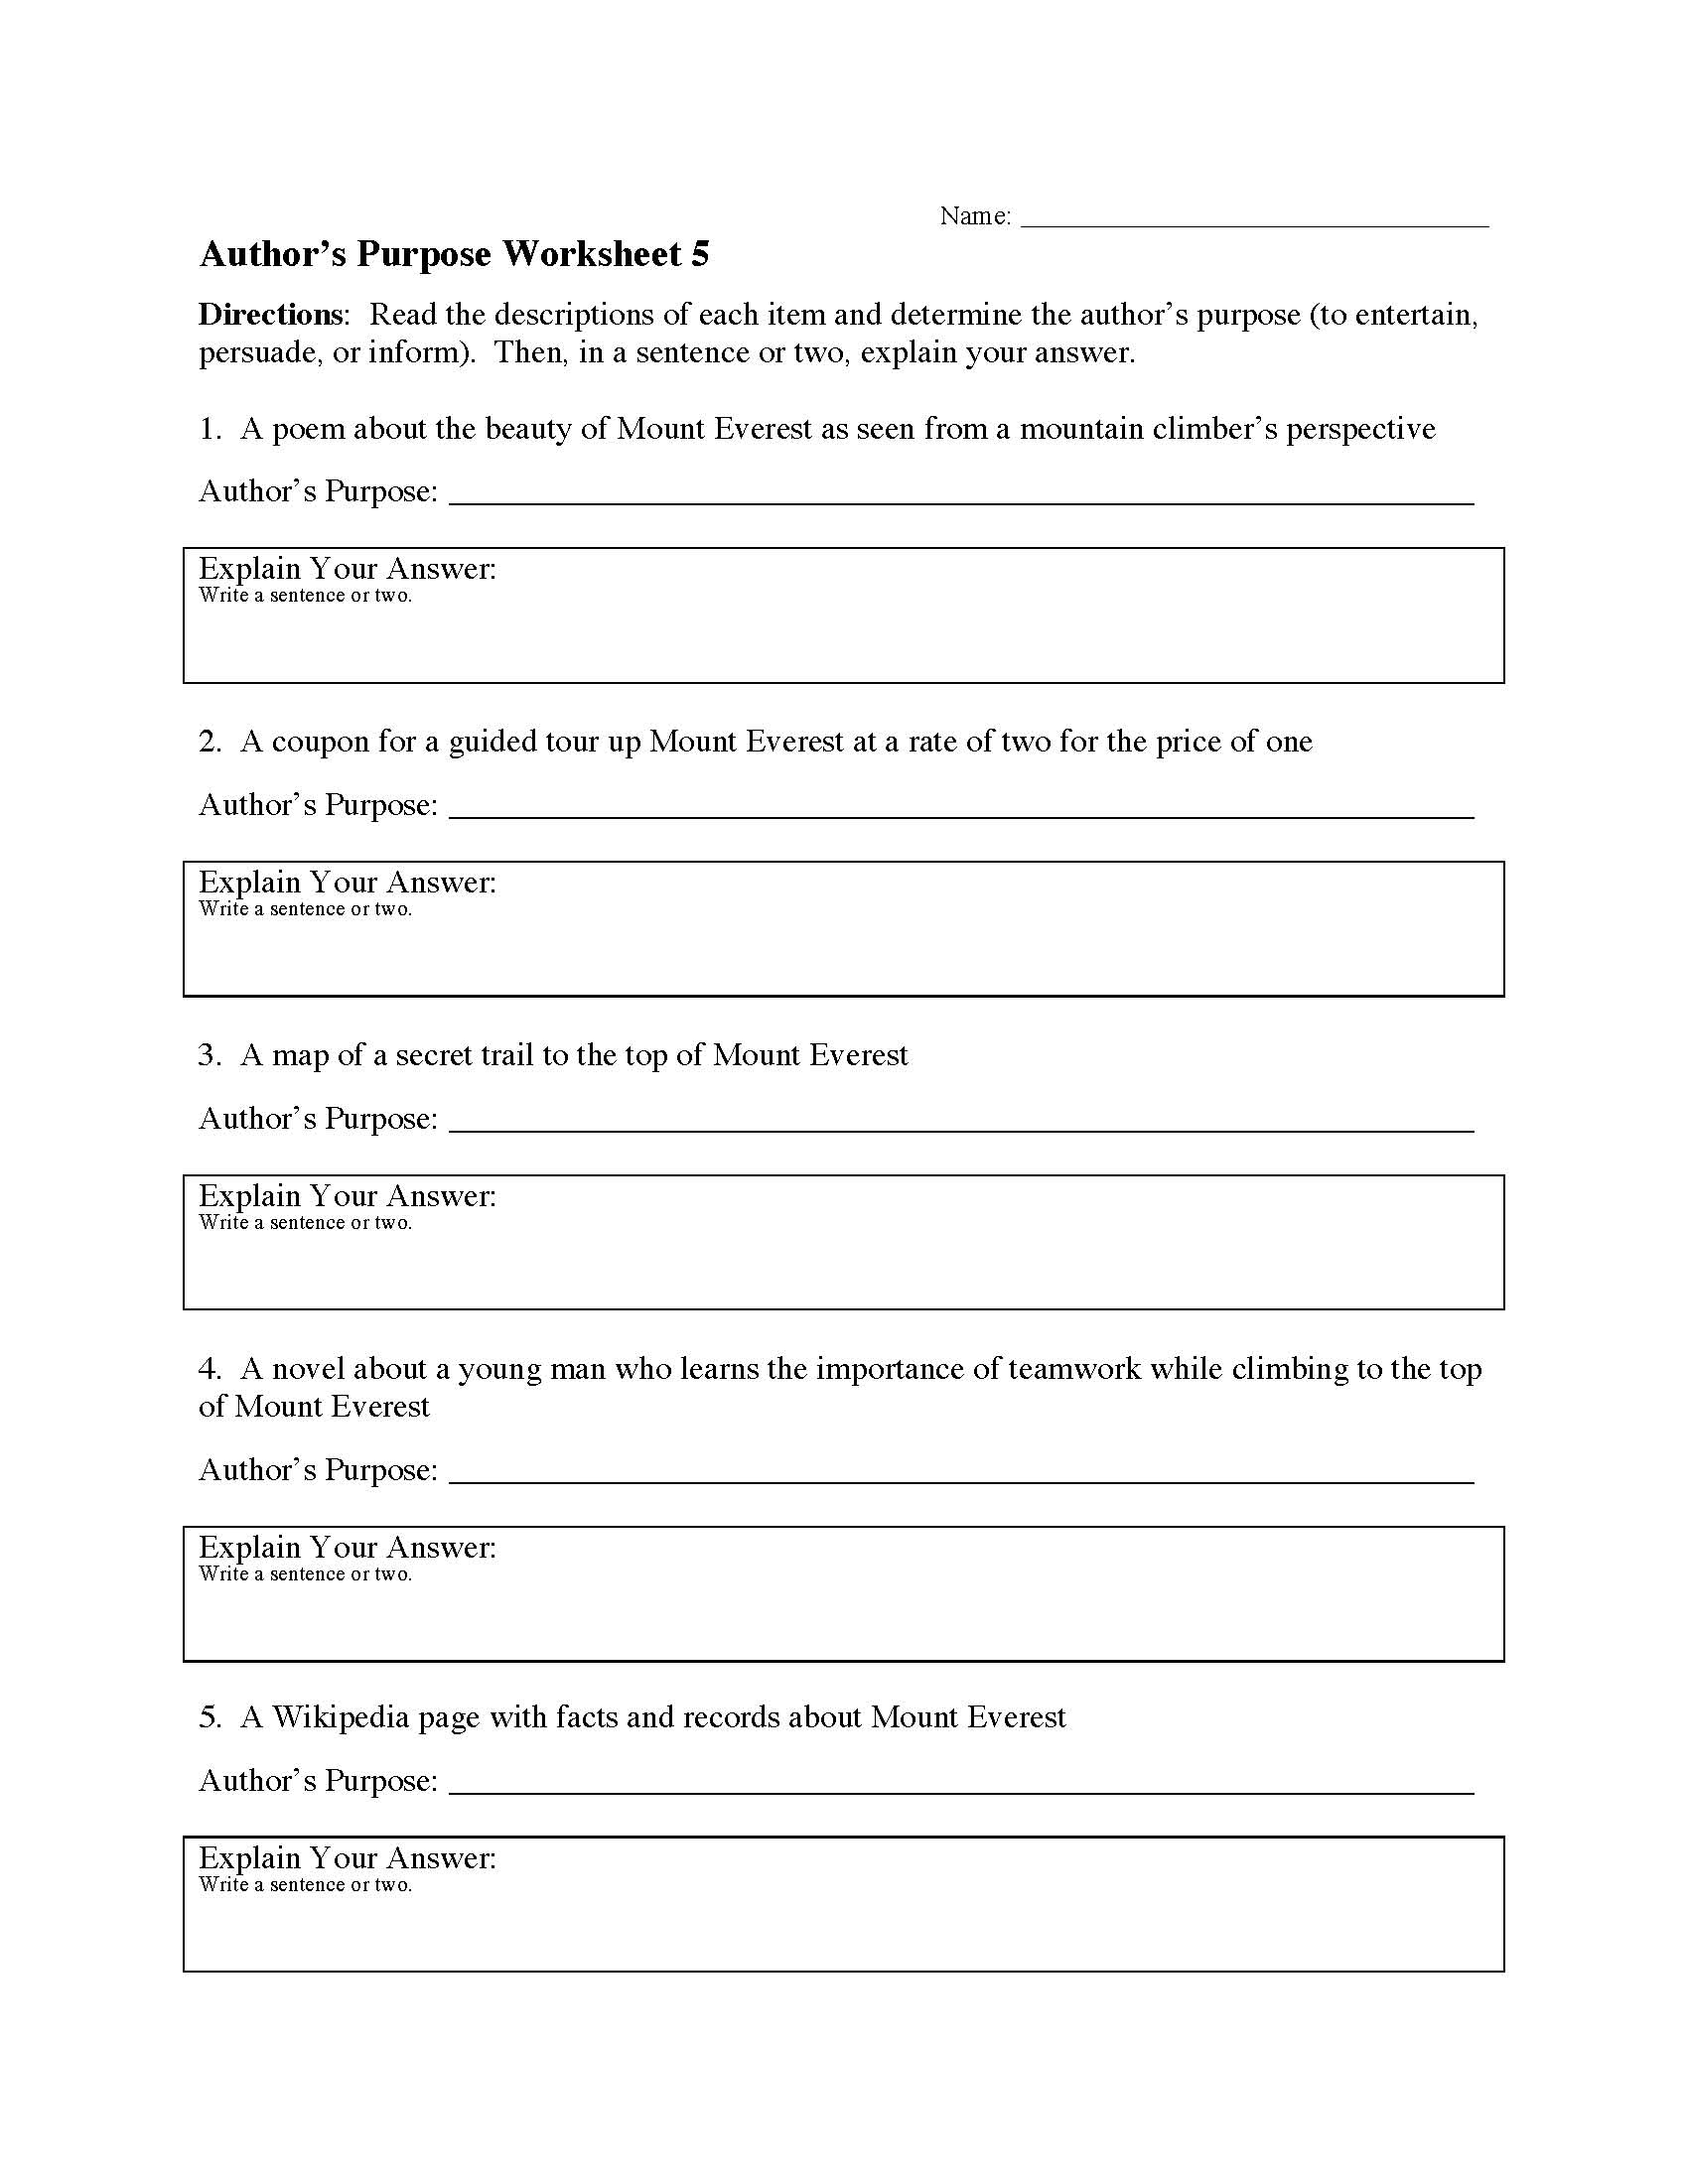 Author's Purpose Review Game (5 types) - U-Know Reading Skills Activity -  Fun in 5th Grade & MORE